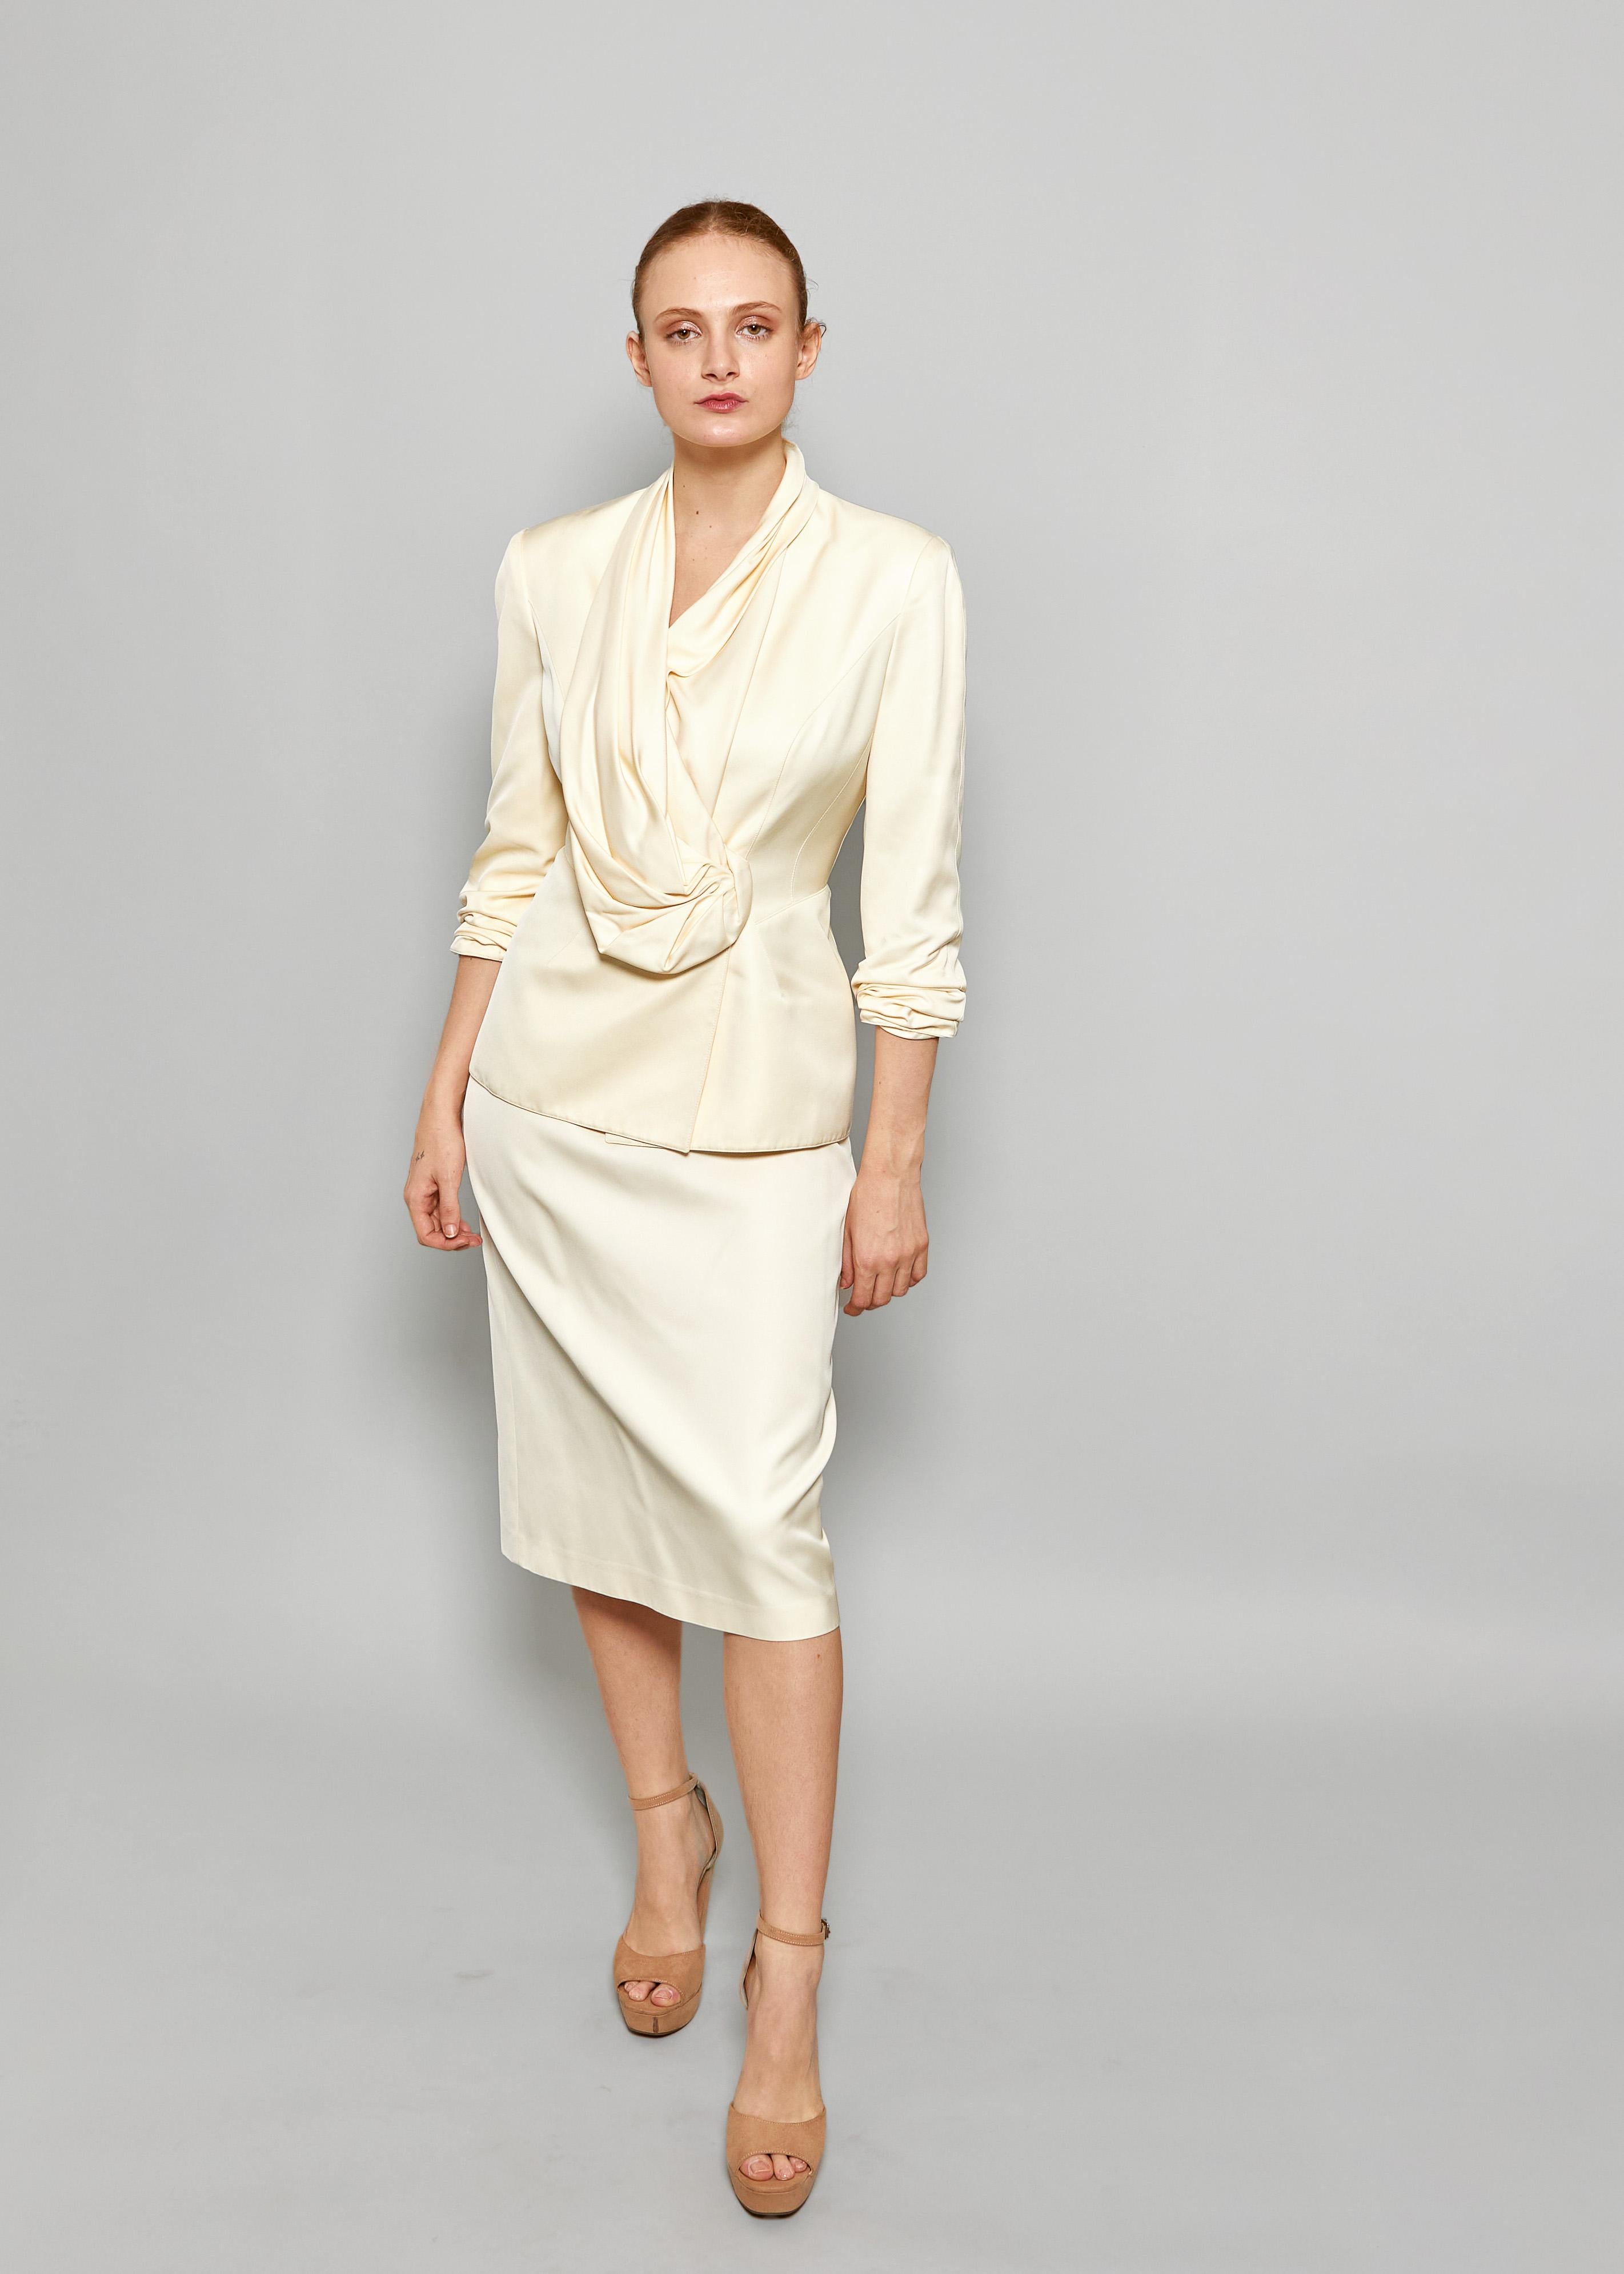 Elevate your timeless style with our Thierry Mugler 1990's Cream Skirt Suit. With its ruched draped blazer and creamy hue, this suit exudes elegance and sophistication. Perfect for any occasion, it will add a touch of luxury to your